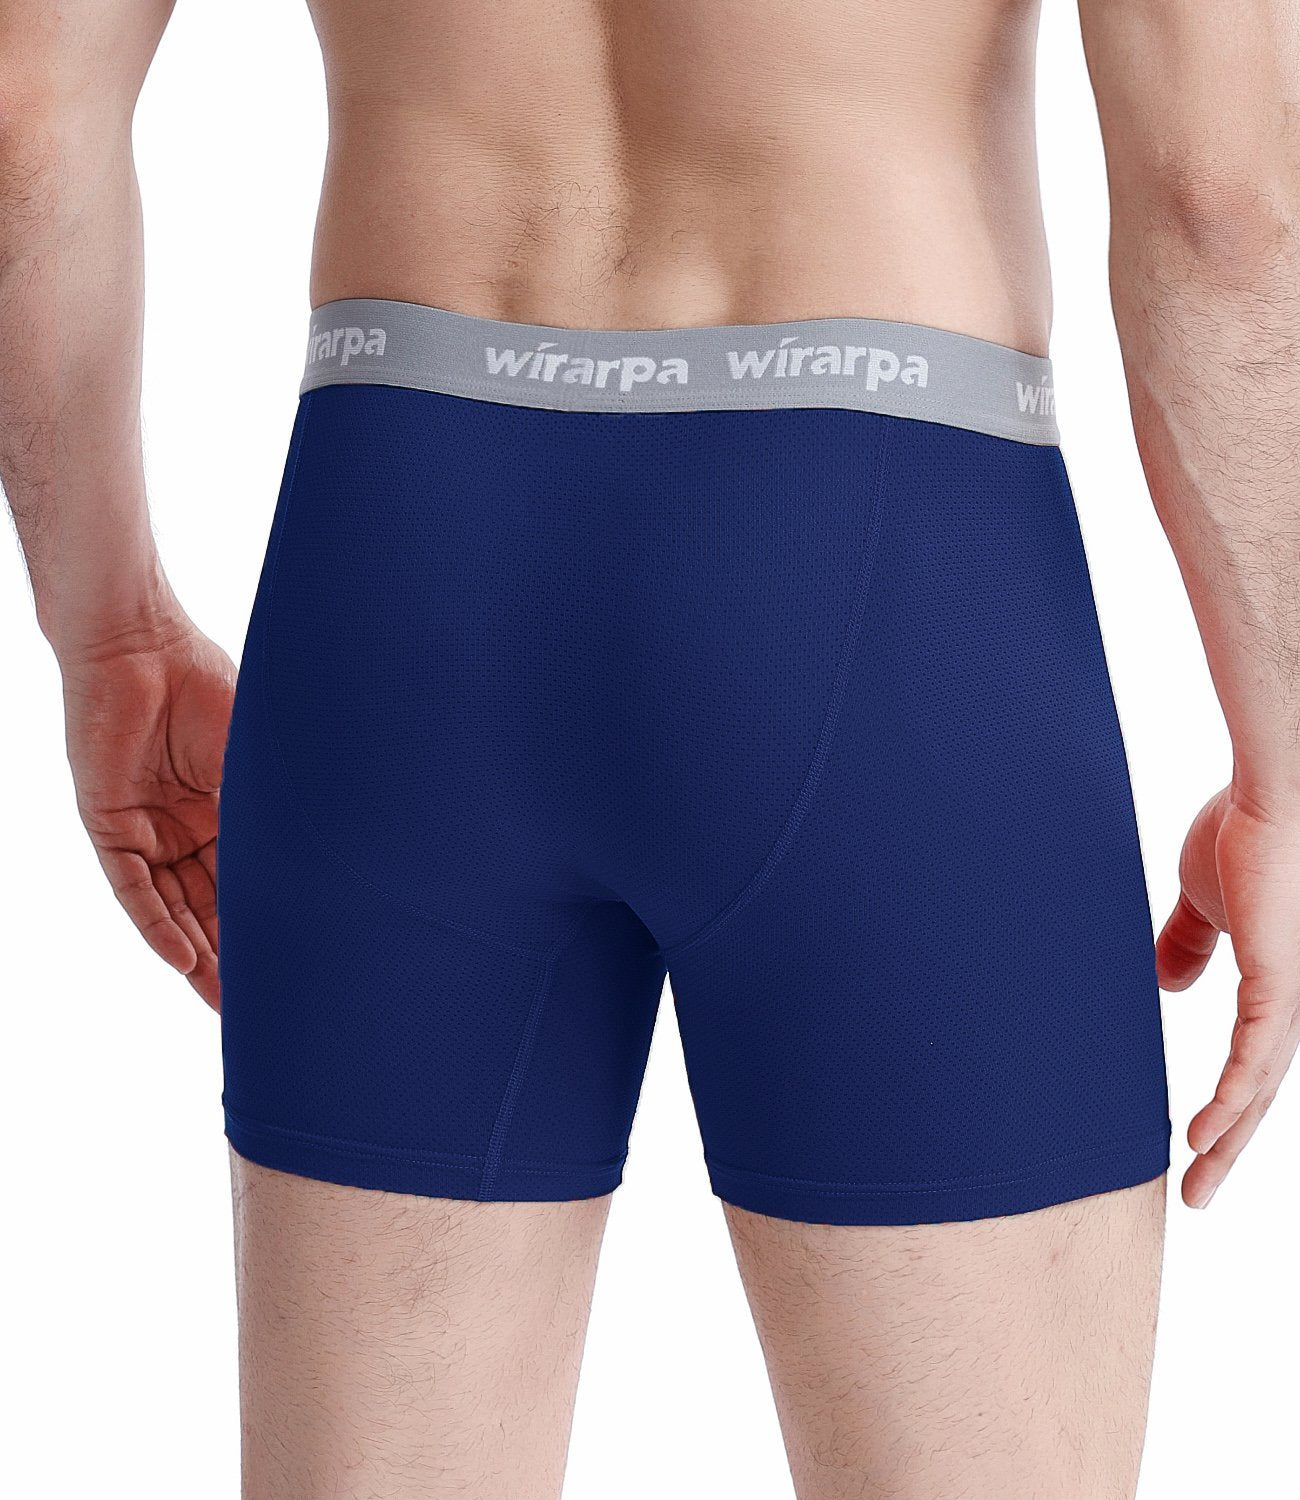 wirarpa Men's Mesh Boxers Shorts Open Fly Mens Trunks Stretchy